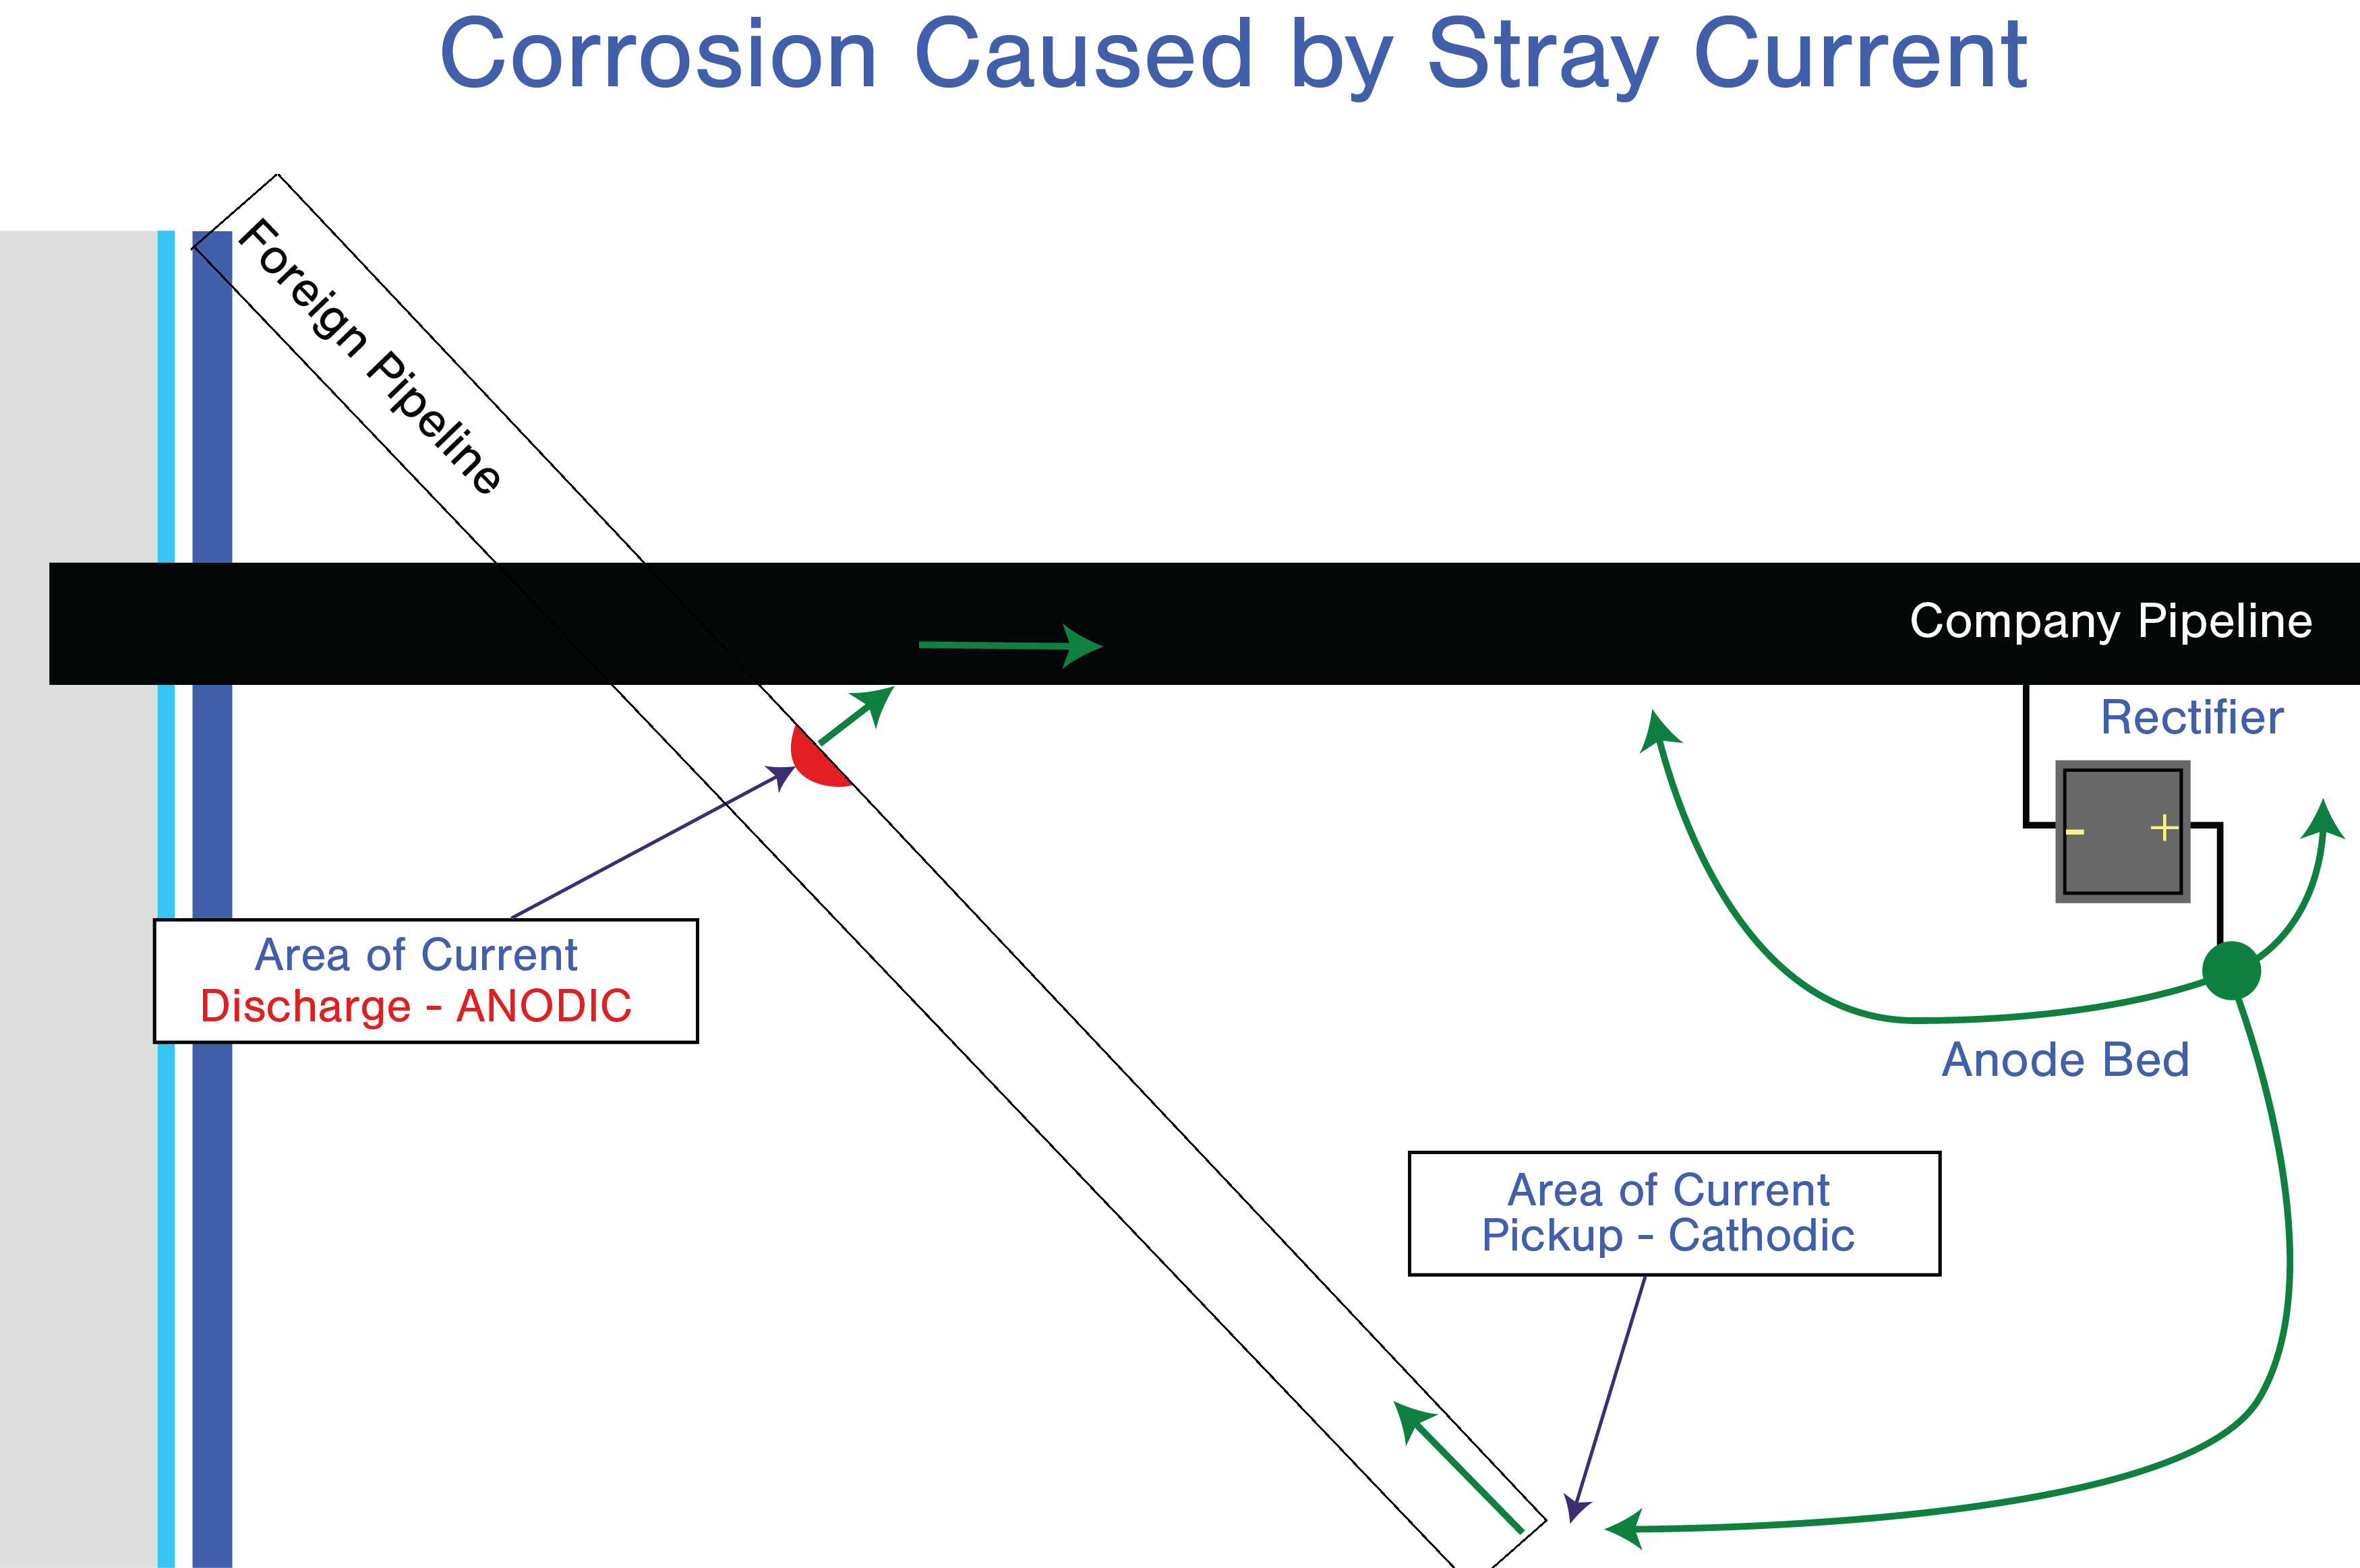 Figure 1. Diagram of stray current corrosion.